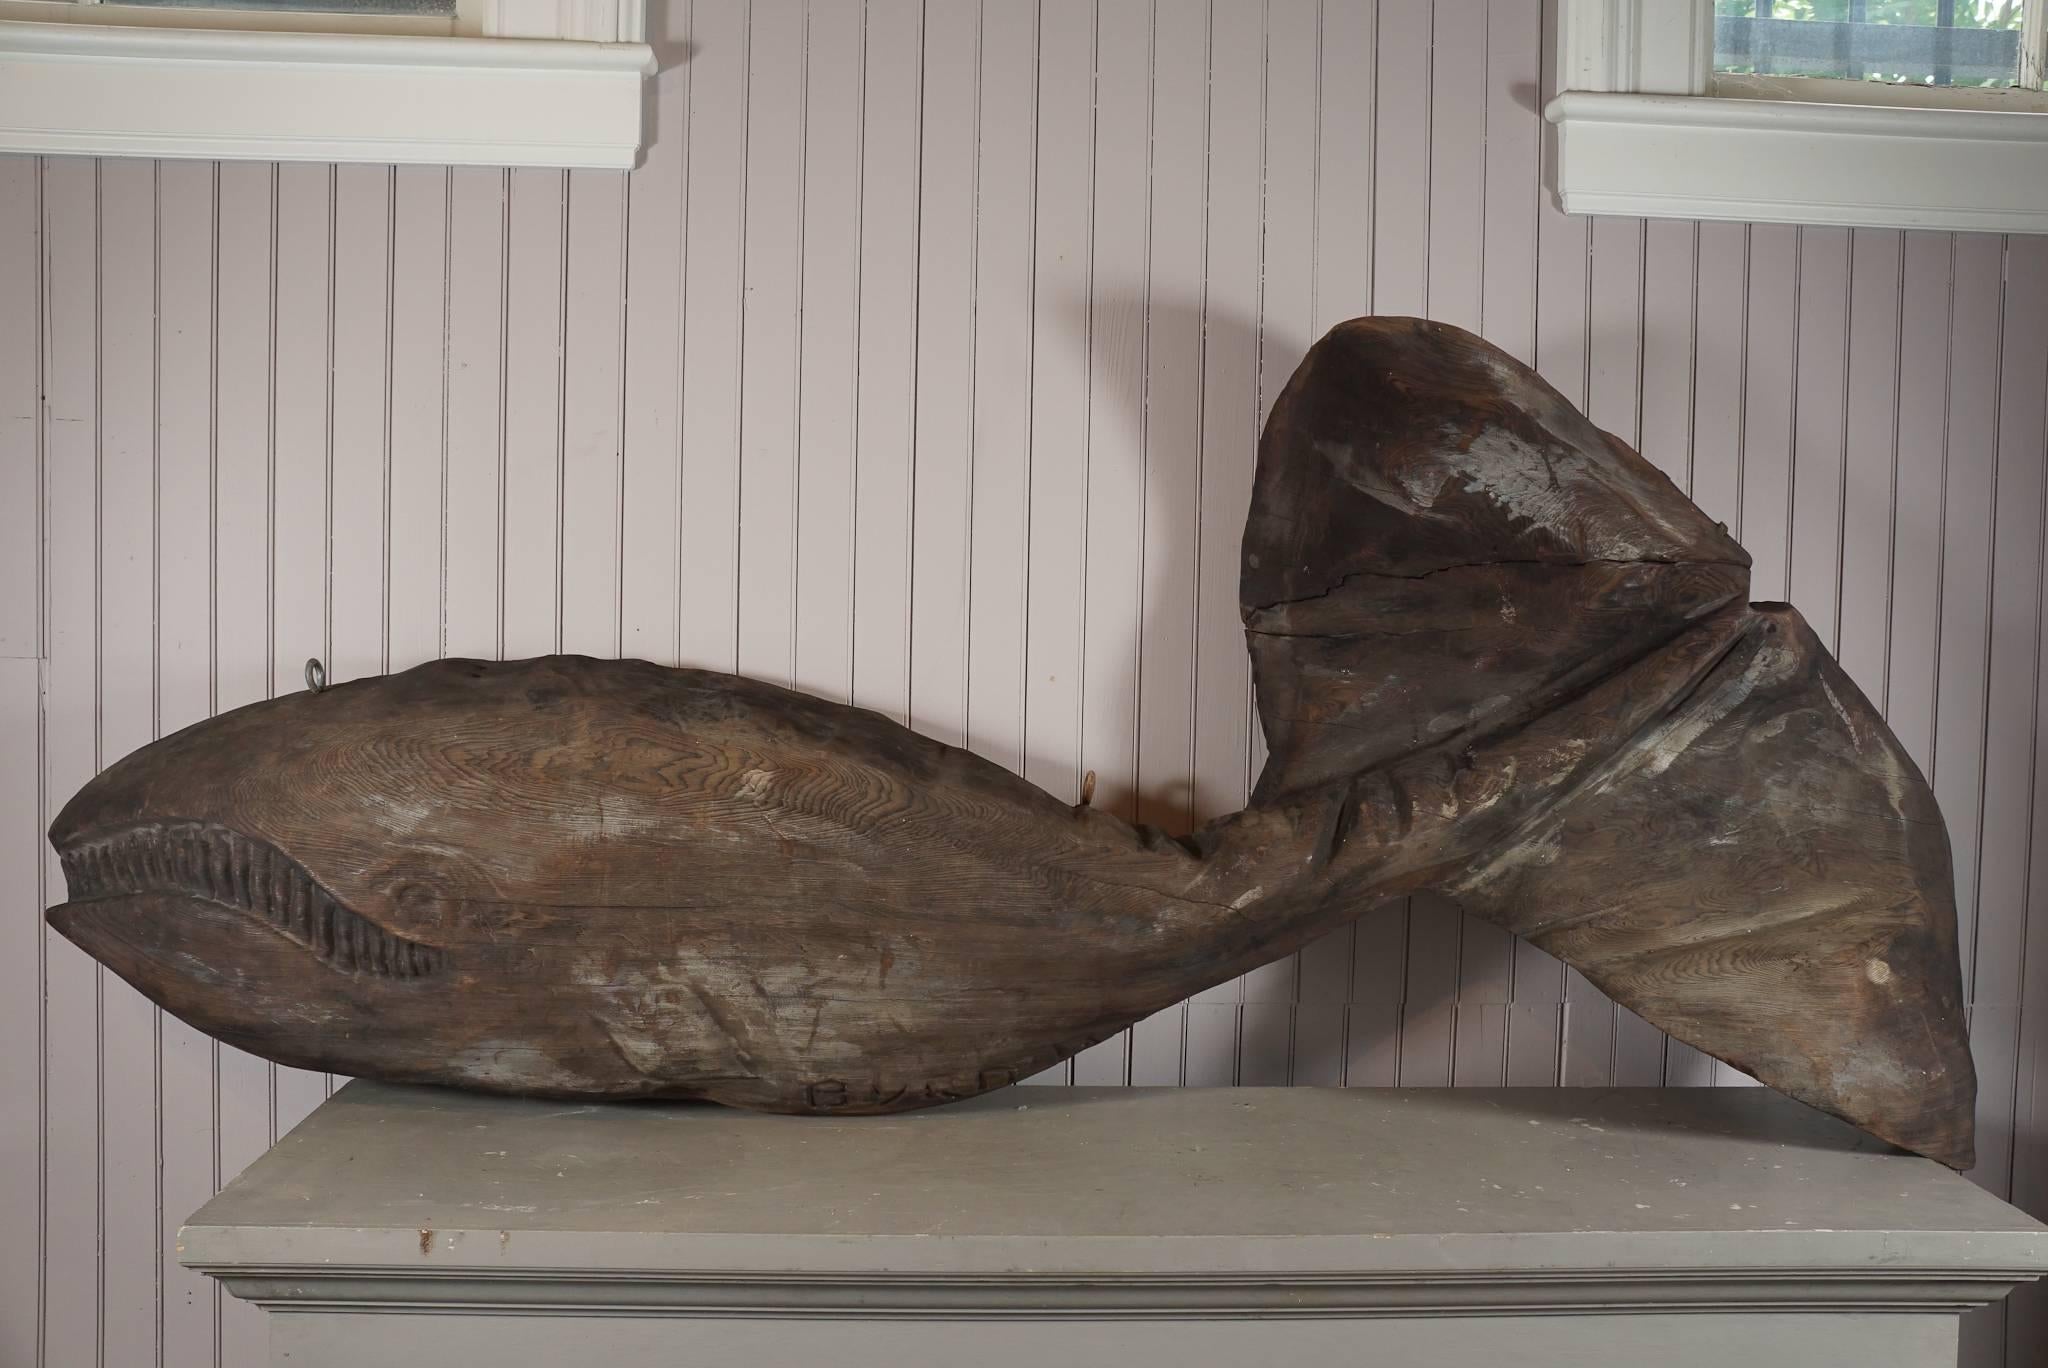 Mendocino Whale War of 1976, sculptor Byrd Baker of Mendocino, California, sold whale sculptures to purchase a ship for fighting the Japanese whalers and bring awareness to their horrendous plight, redwood, weathered surface with traces of a grey